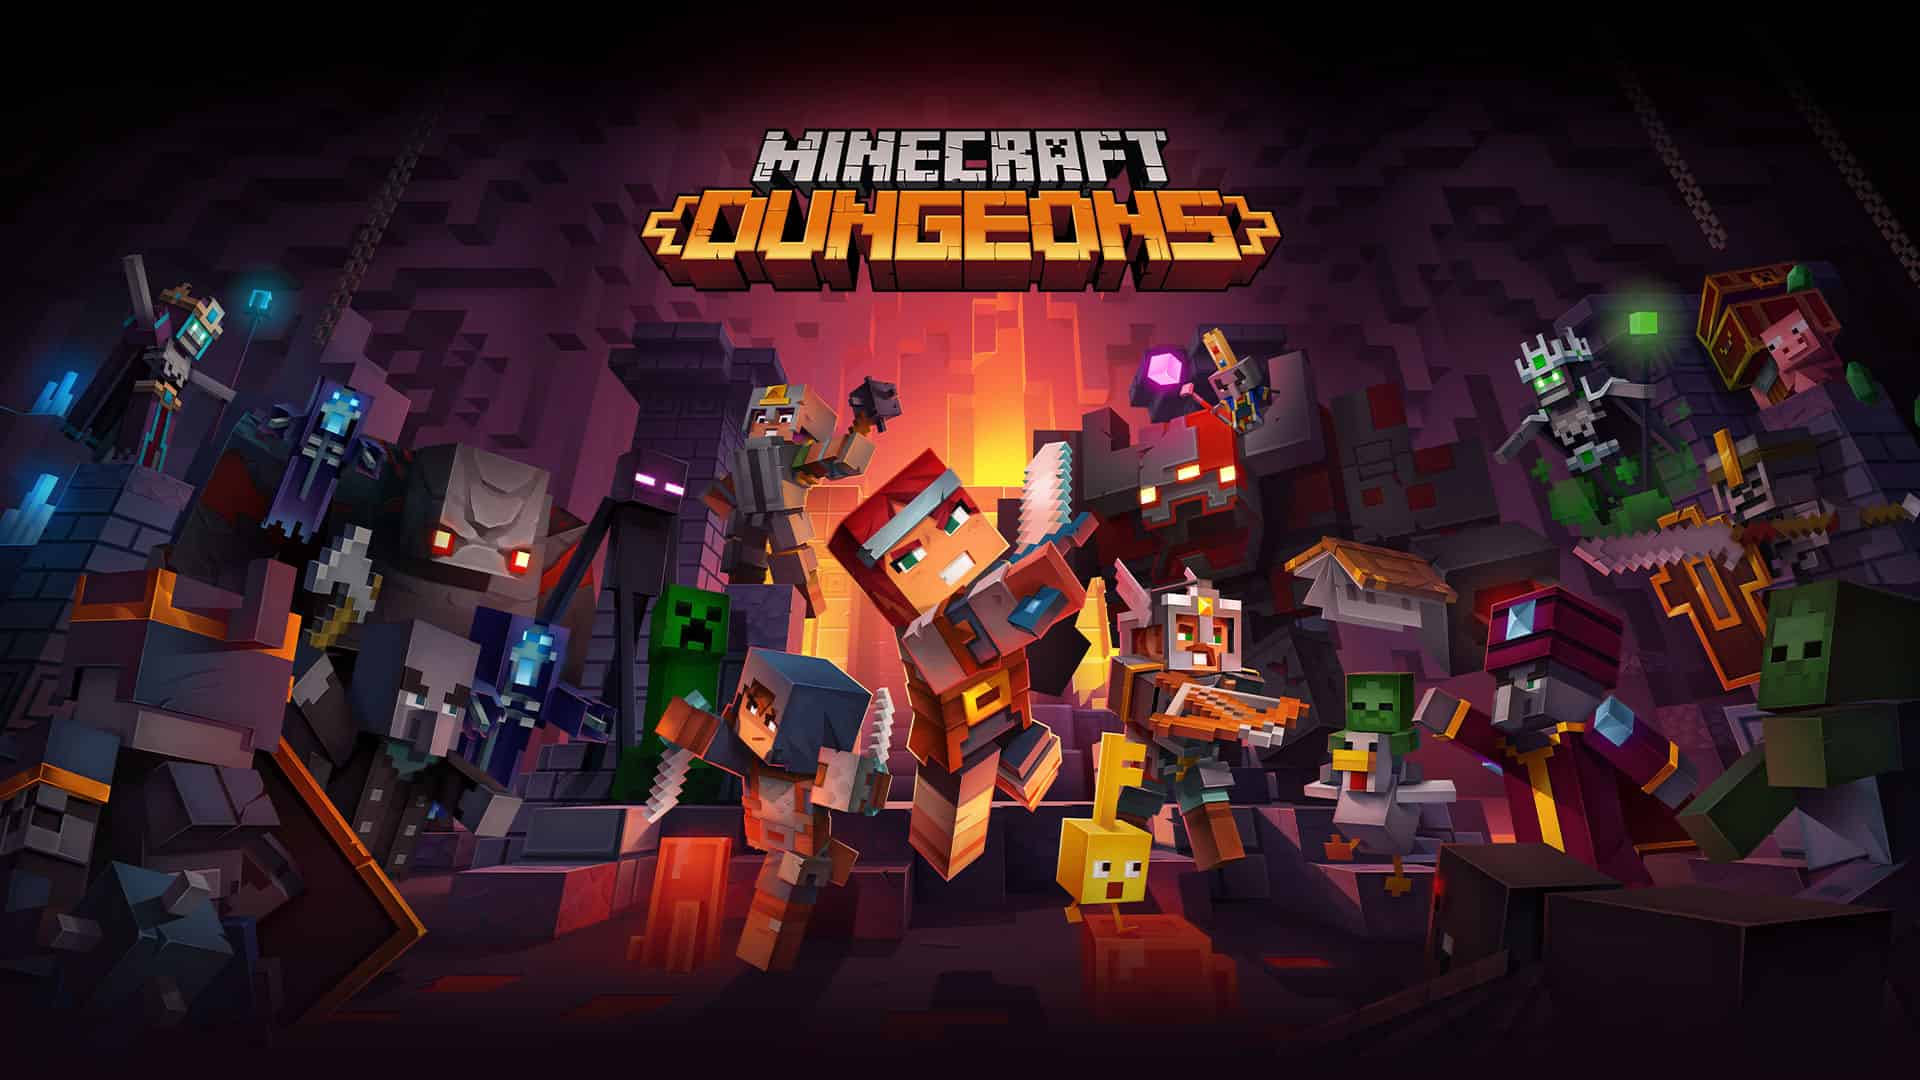 Spoopy and serene the sound of 'Minecraft Dungeons' with Mojang's audio team:. A Sound Effect